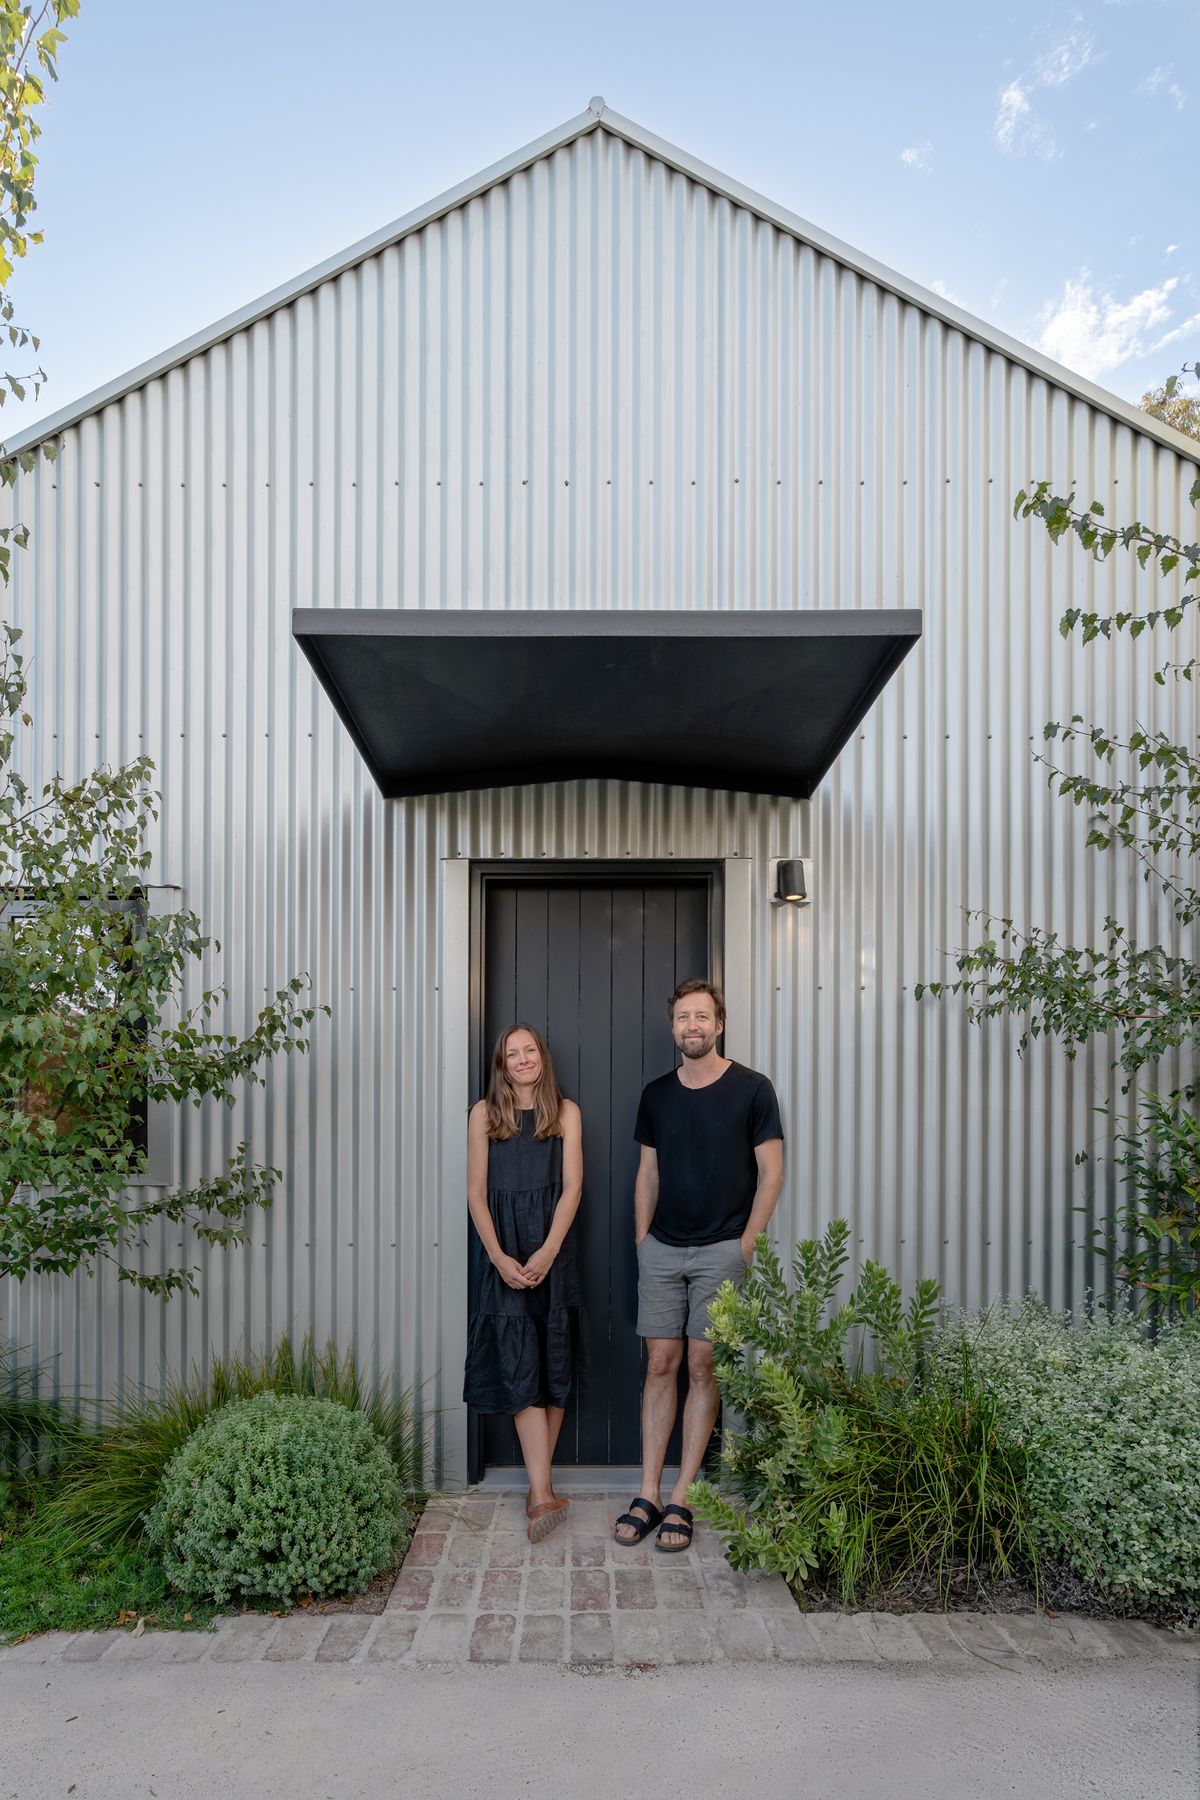 CO-founders and landscape architects Joel Barker and Hannah Pannell outside their new home